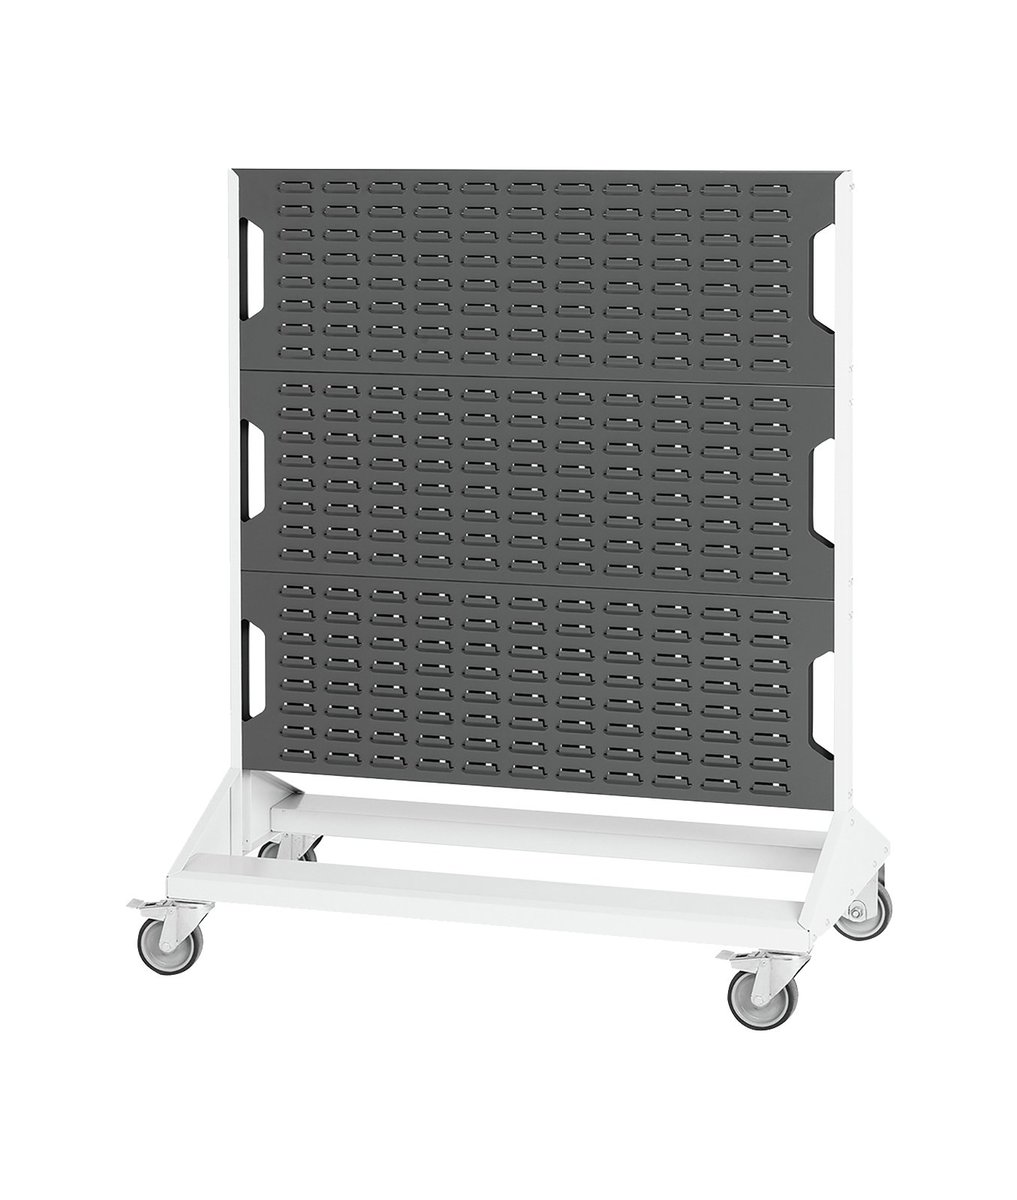 16917170. - Louvre panel trolley double sided